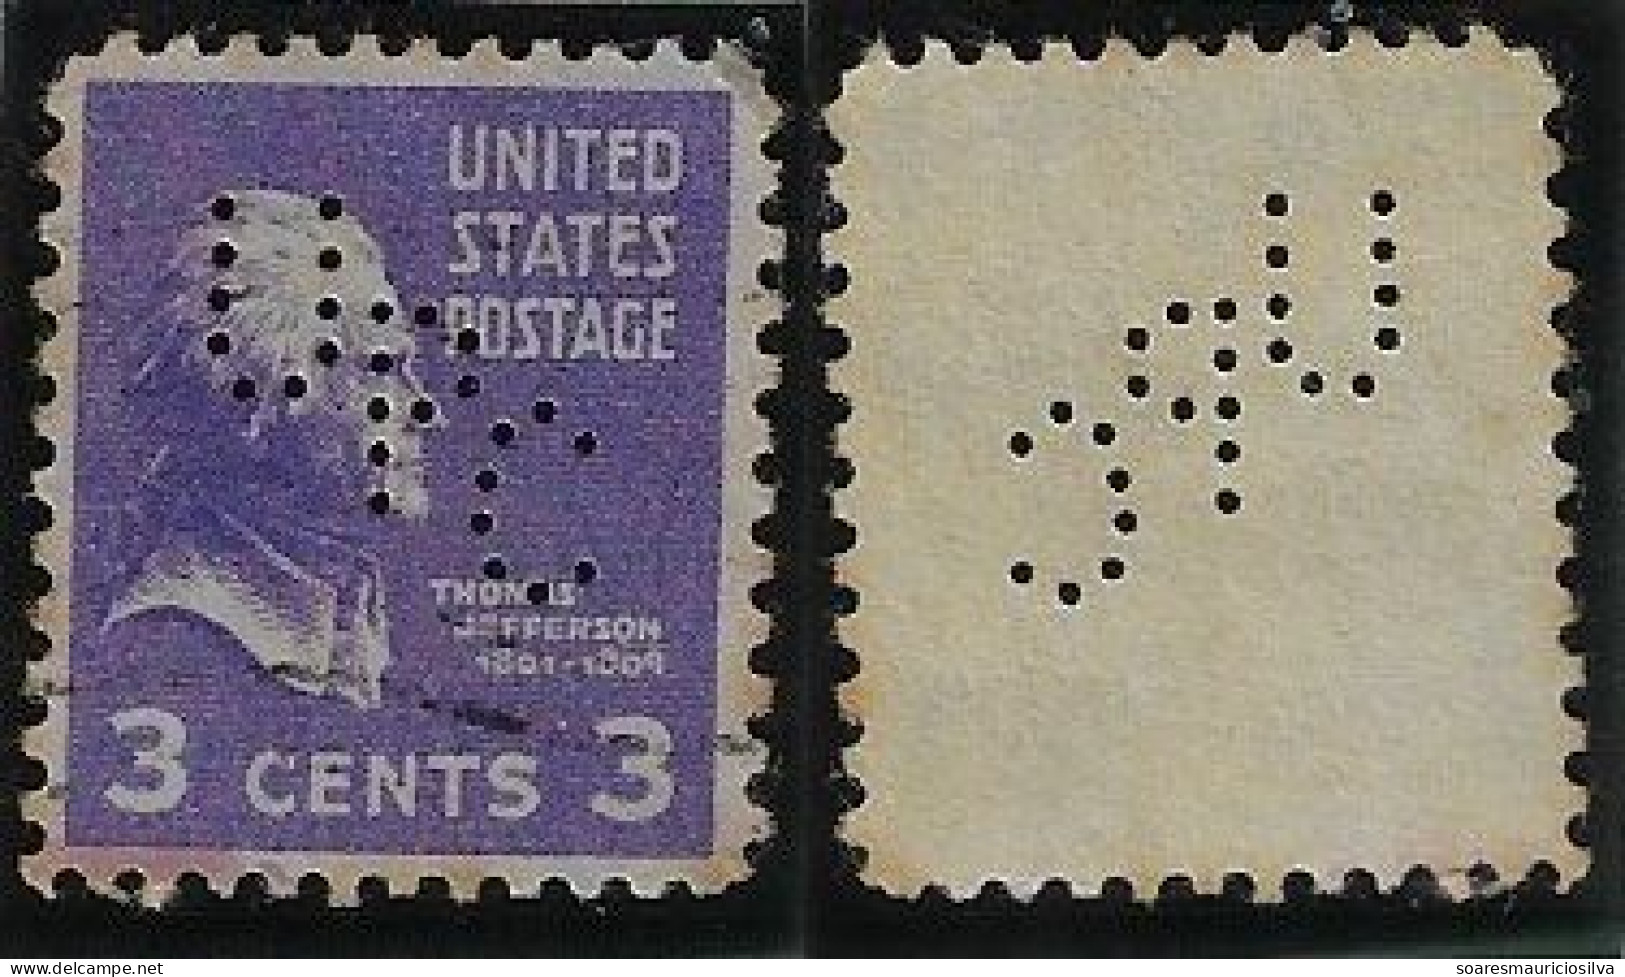 USA United States 1931/1954 Stamp With Perfin UPC By The Union Pacific Coal Company From Rock Springs Lochung Perfore - Perfin